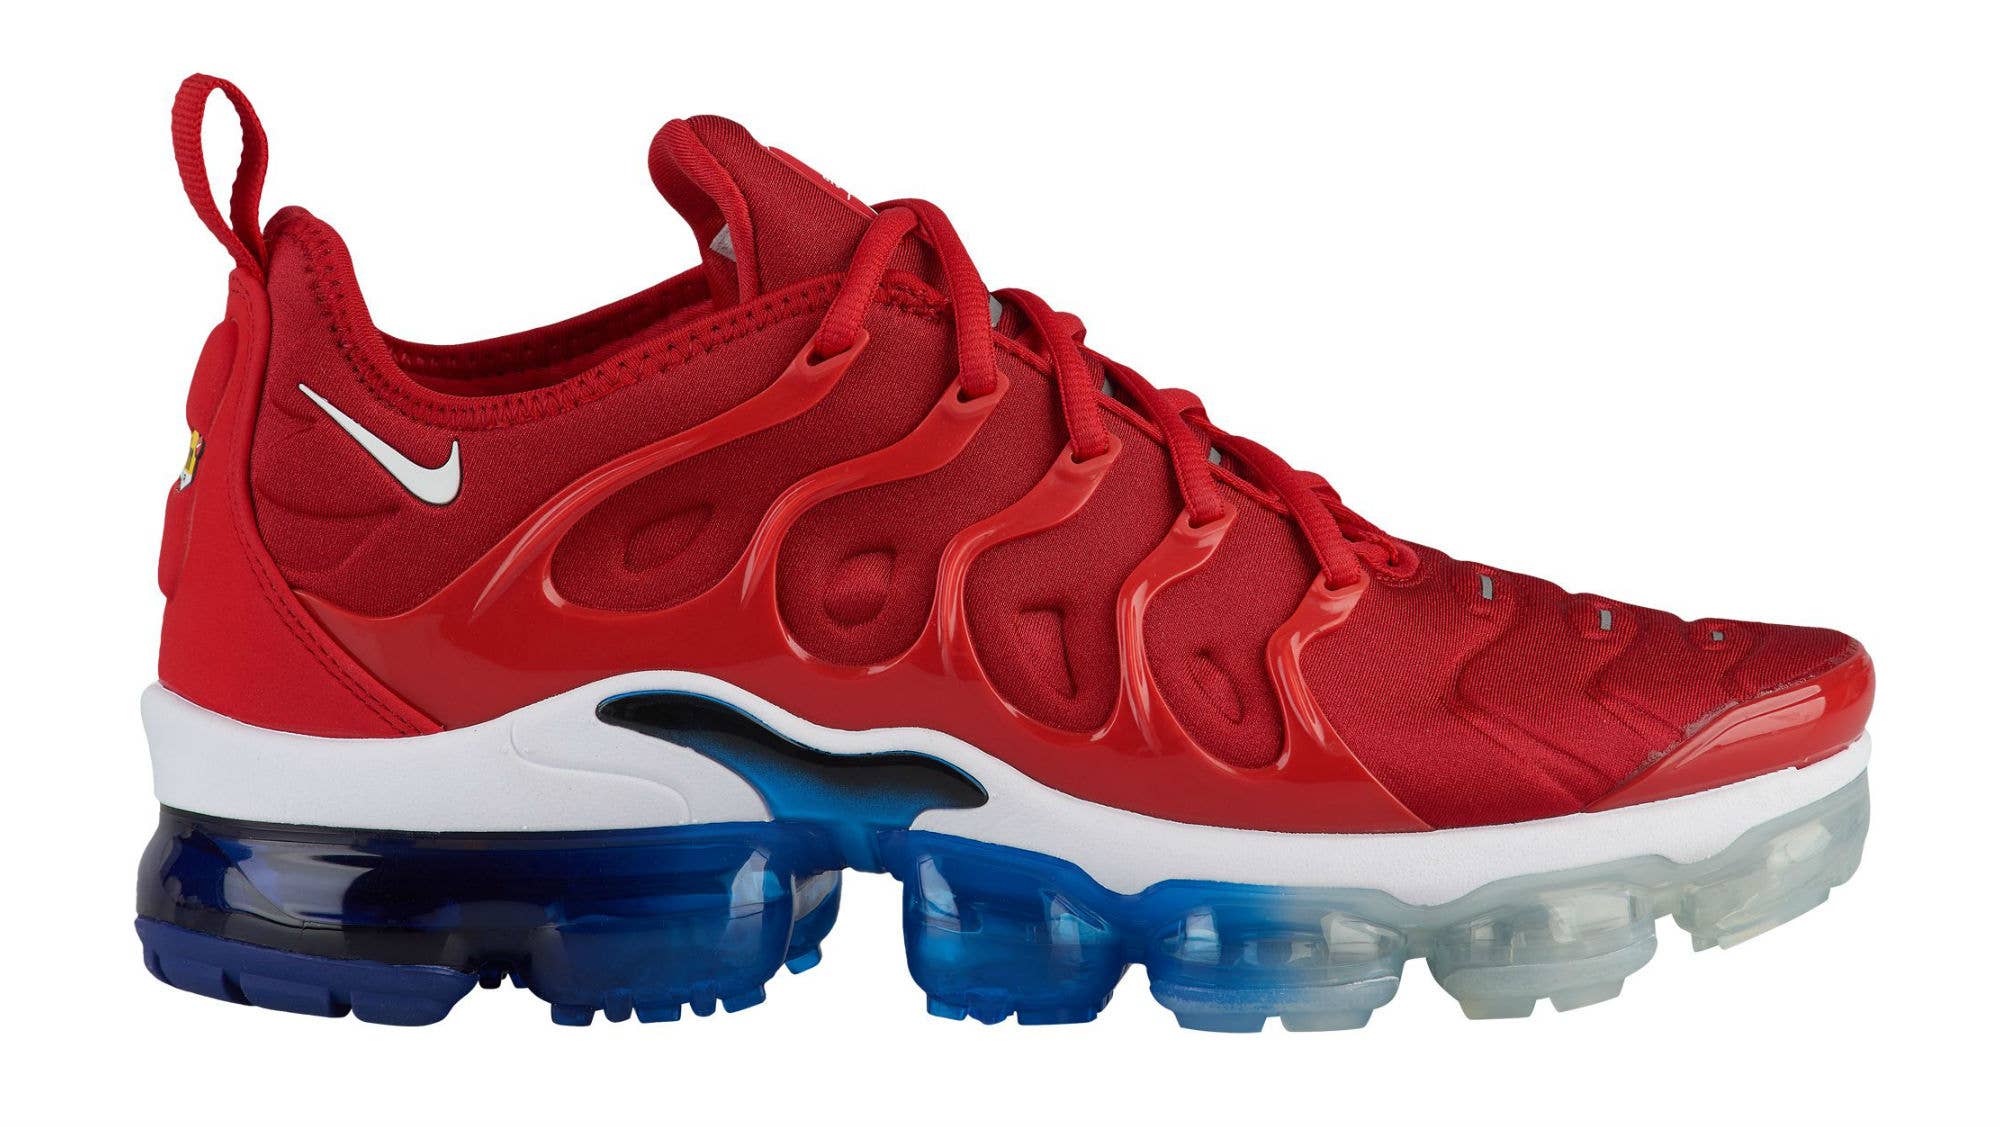 Nike Air VaporMax Plus USA Red White Blue Release Date 924453 601 Profile